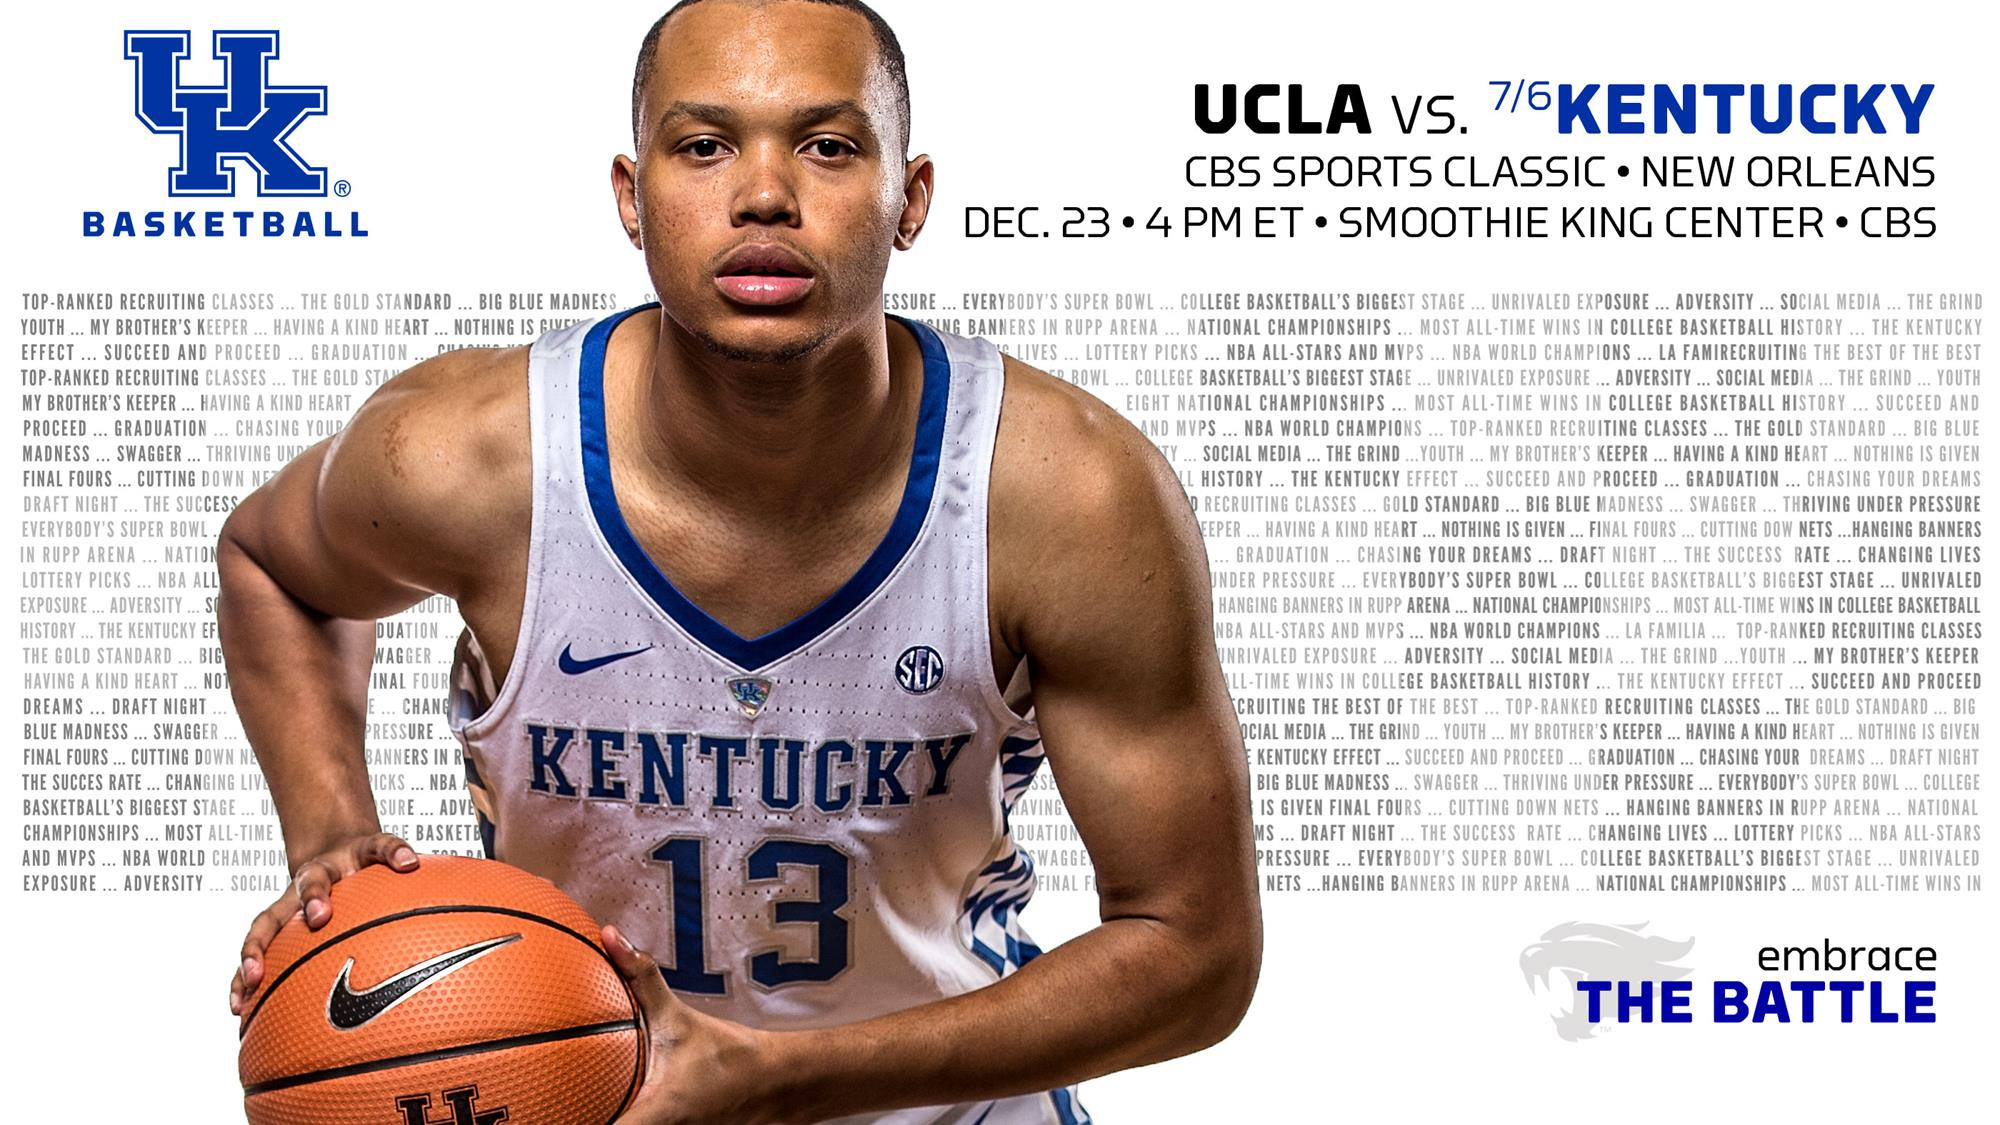 UK Faces Marquee Matchup with UCLA in NOLA Return